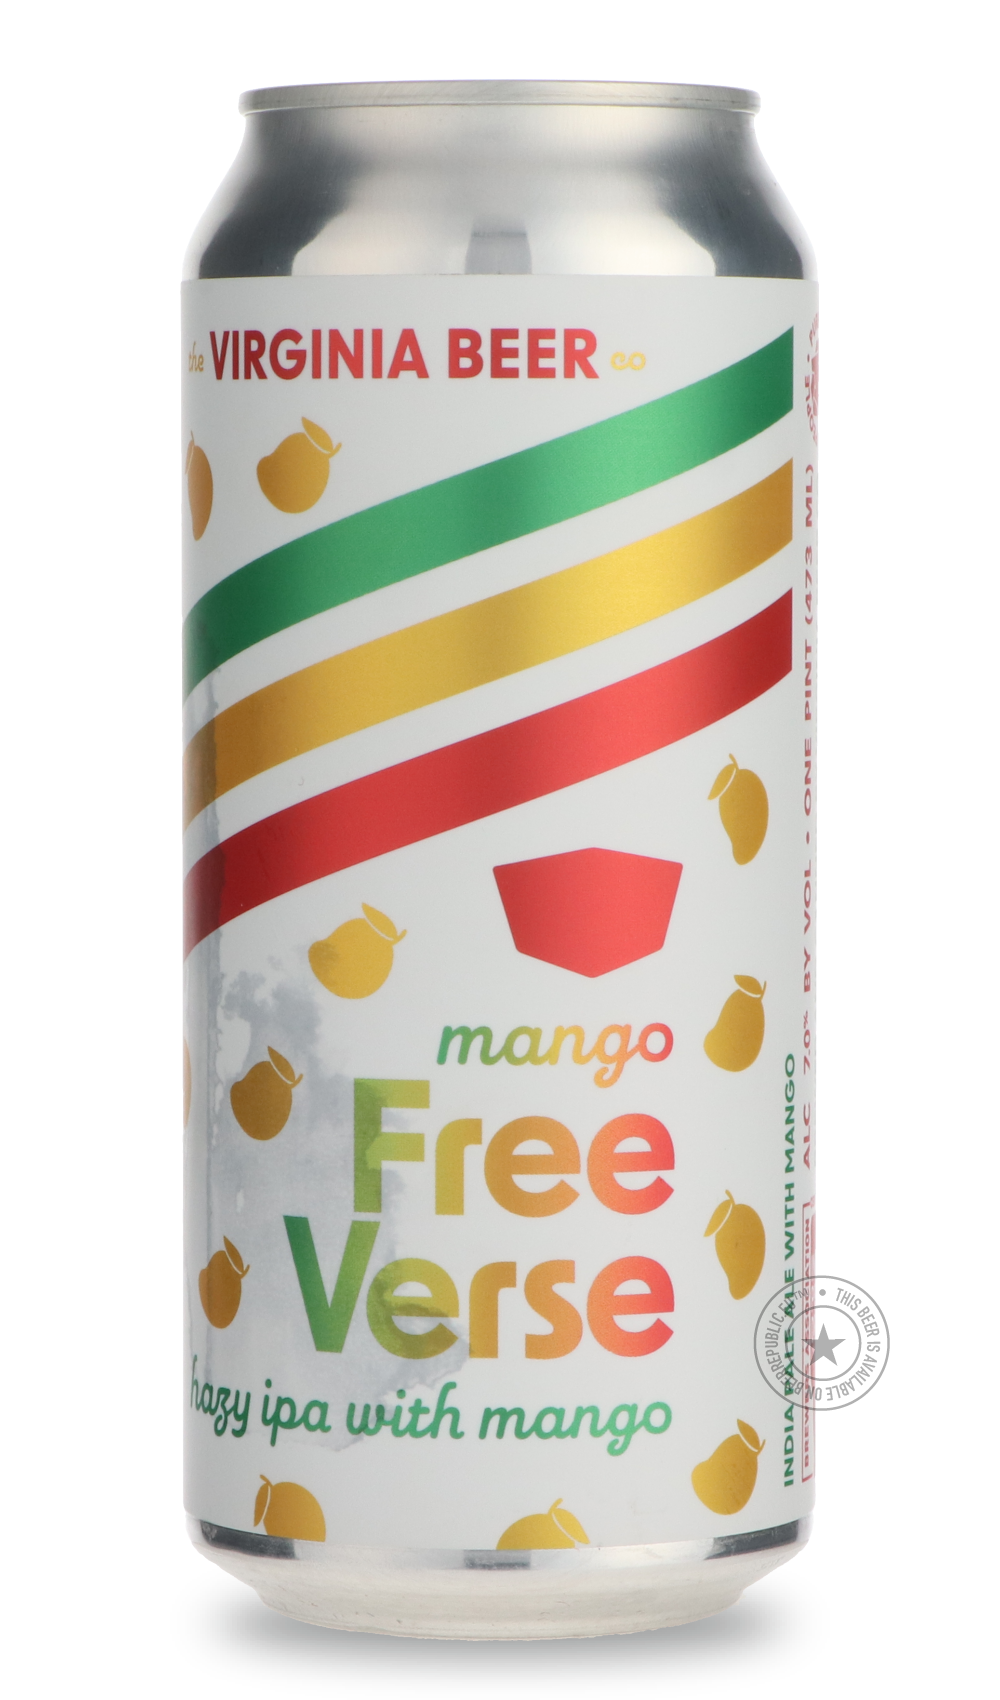 -The Virginia Beer Company- Mango Free Verse-IPA- Only @ Beer Republic - The best online beer store for American & Canadian craft beer - Buy beer online from the USA and Canada - Bier online kopen - Amerikaans bier kopen - Craft beer store - Craft beer kopen - Amerikanisch bier kaufen - Bier online kaufen - Acheter biere online - IPA - Stout - Porter - New England IPA - Hazy IPA - Imperial Stout - Barrel Aged - Barrel Aged Imperial Stout - Brown - Dark beer - Blond - Blonde - Pilsner - Lager - Wheat - Weize